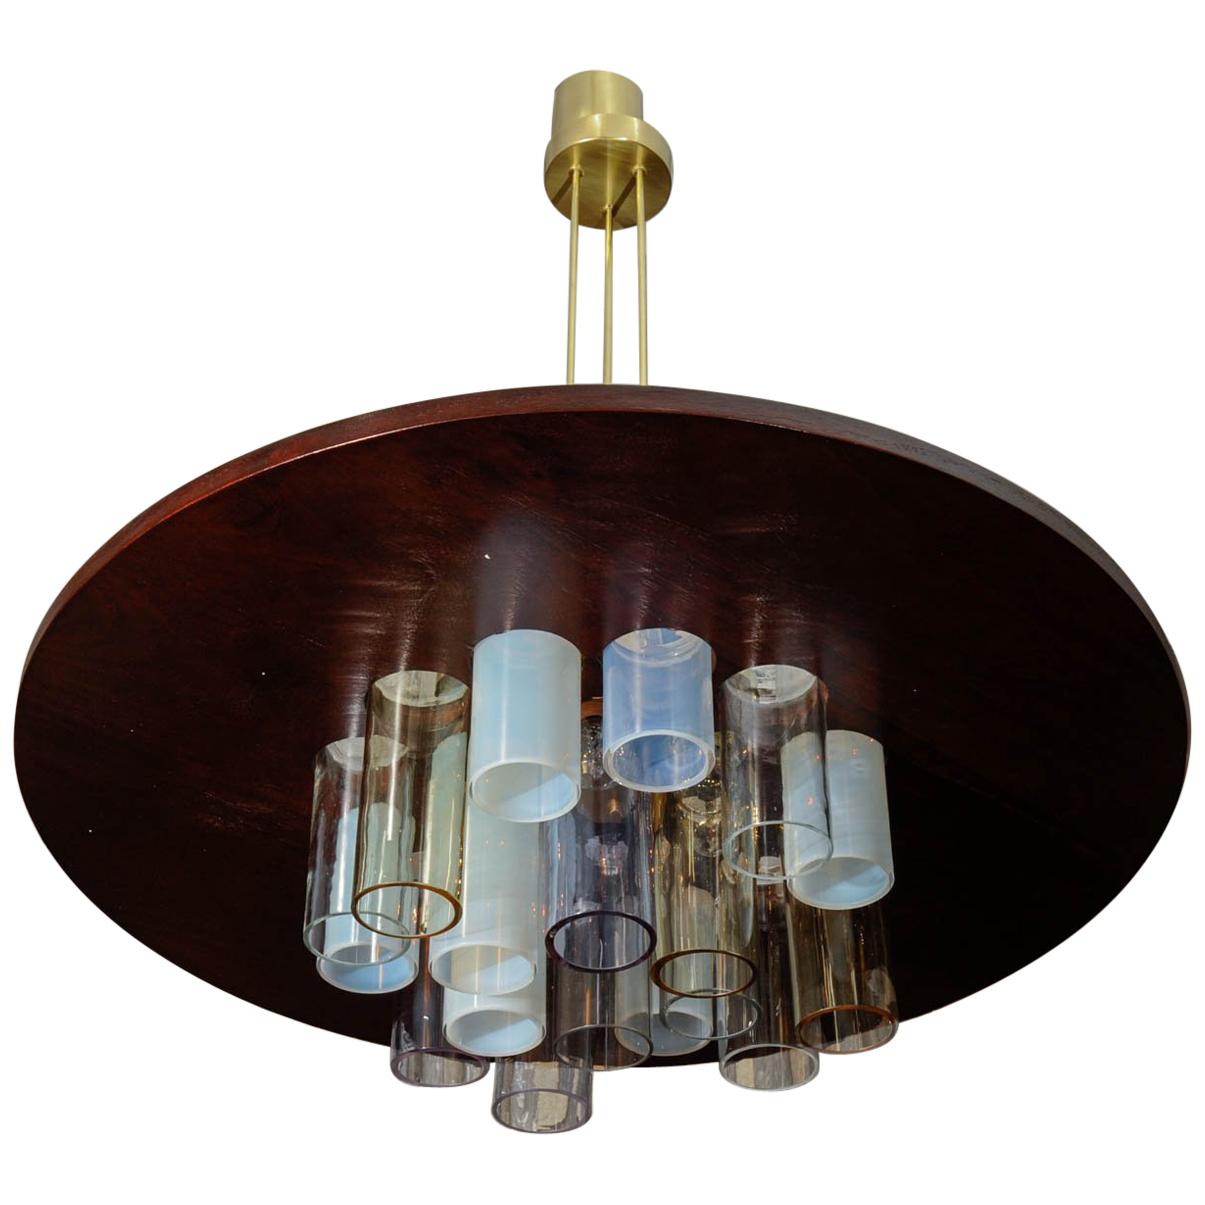 Unique Wood and Glass Chandelier by Esperia